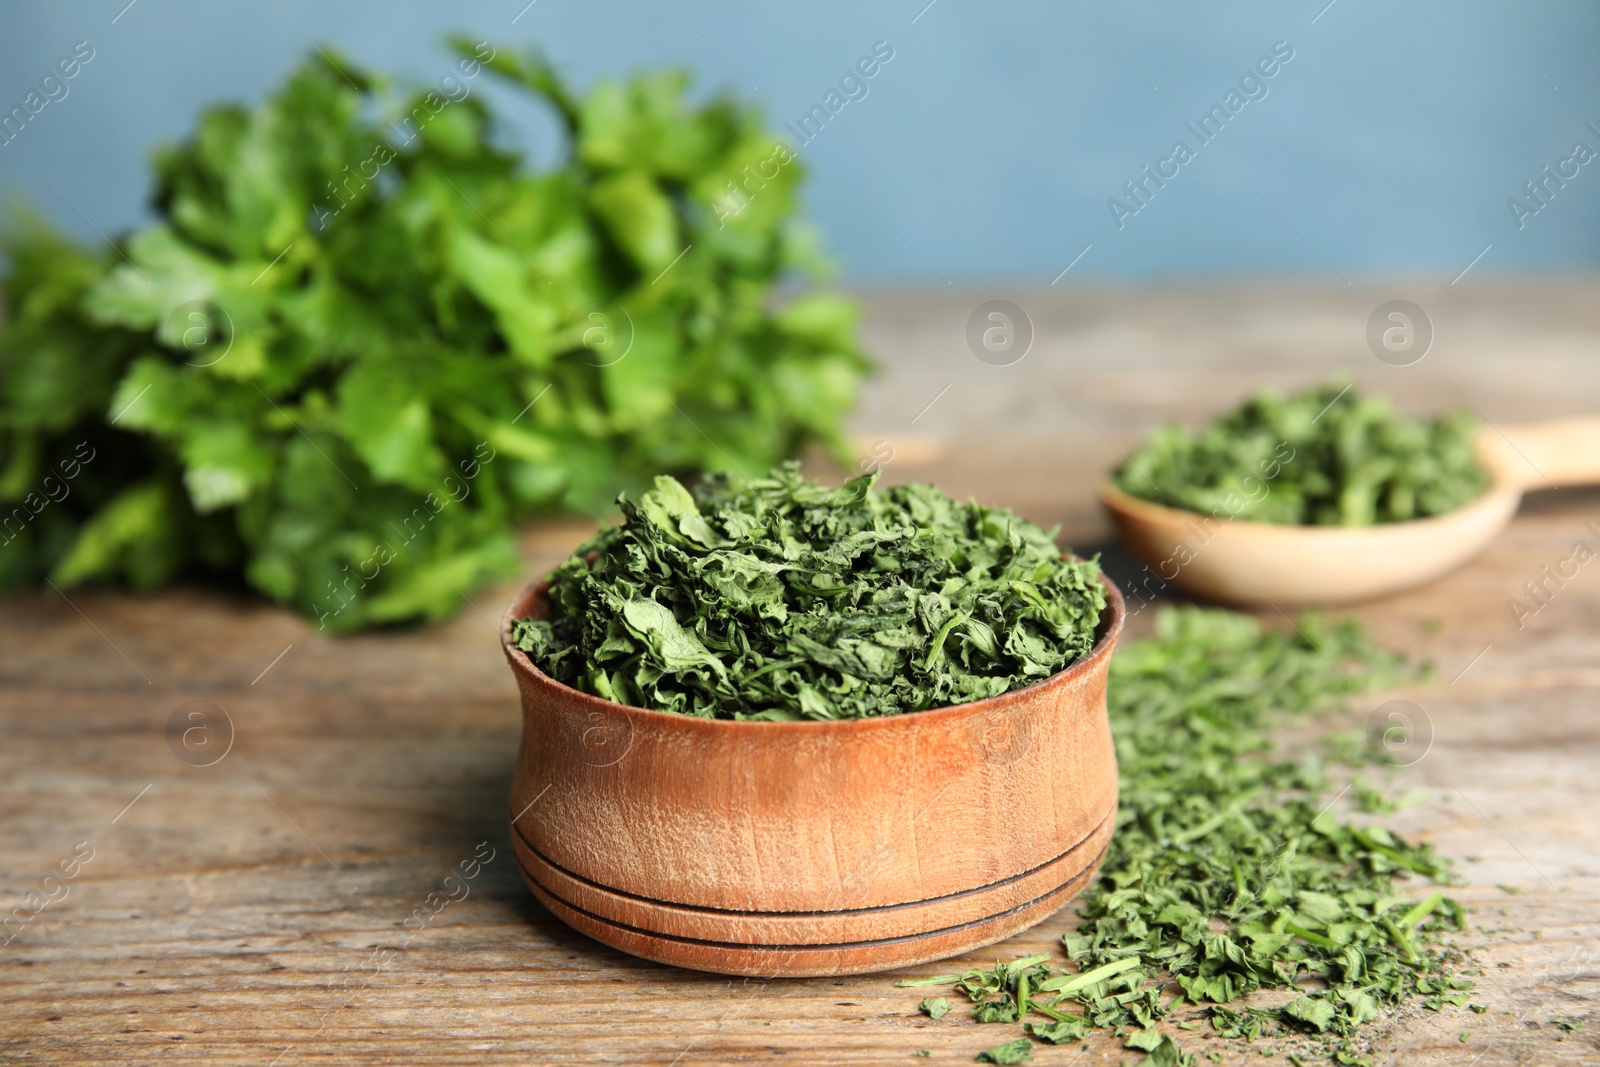 Photo of Bowl of dried parsley on wooden table